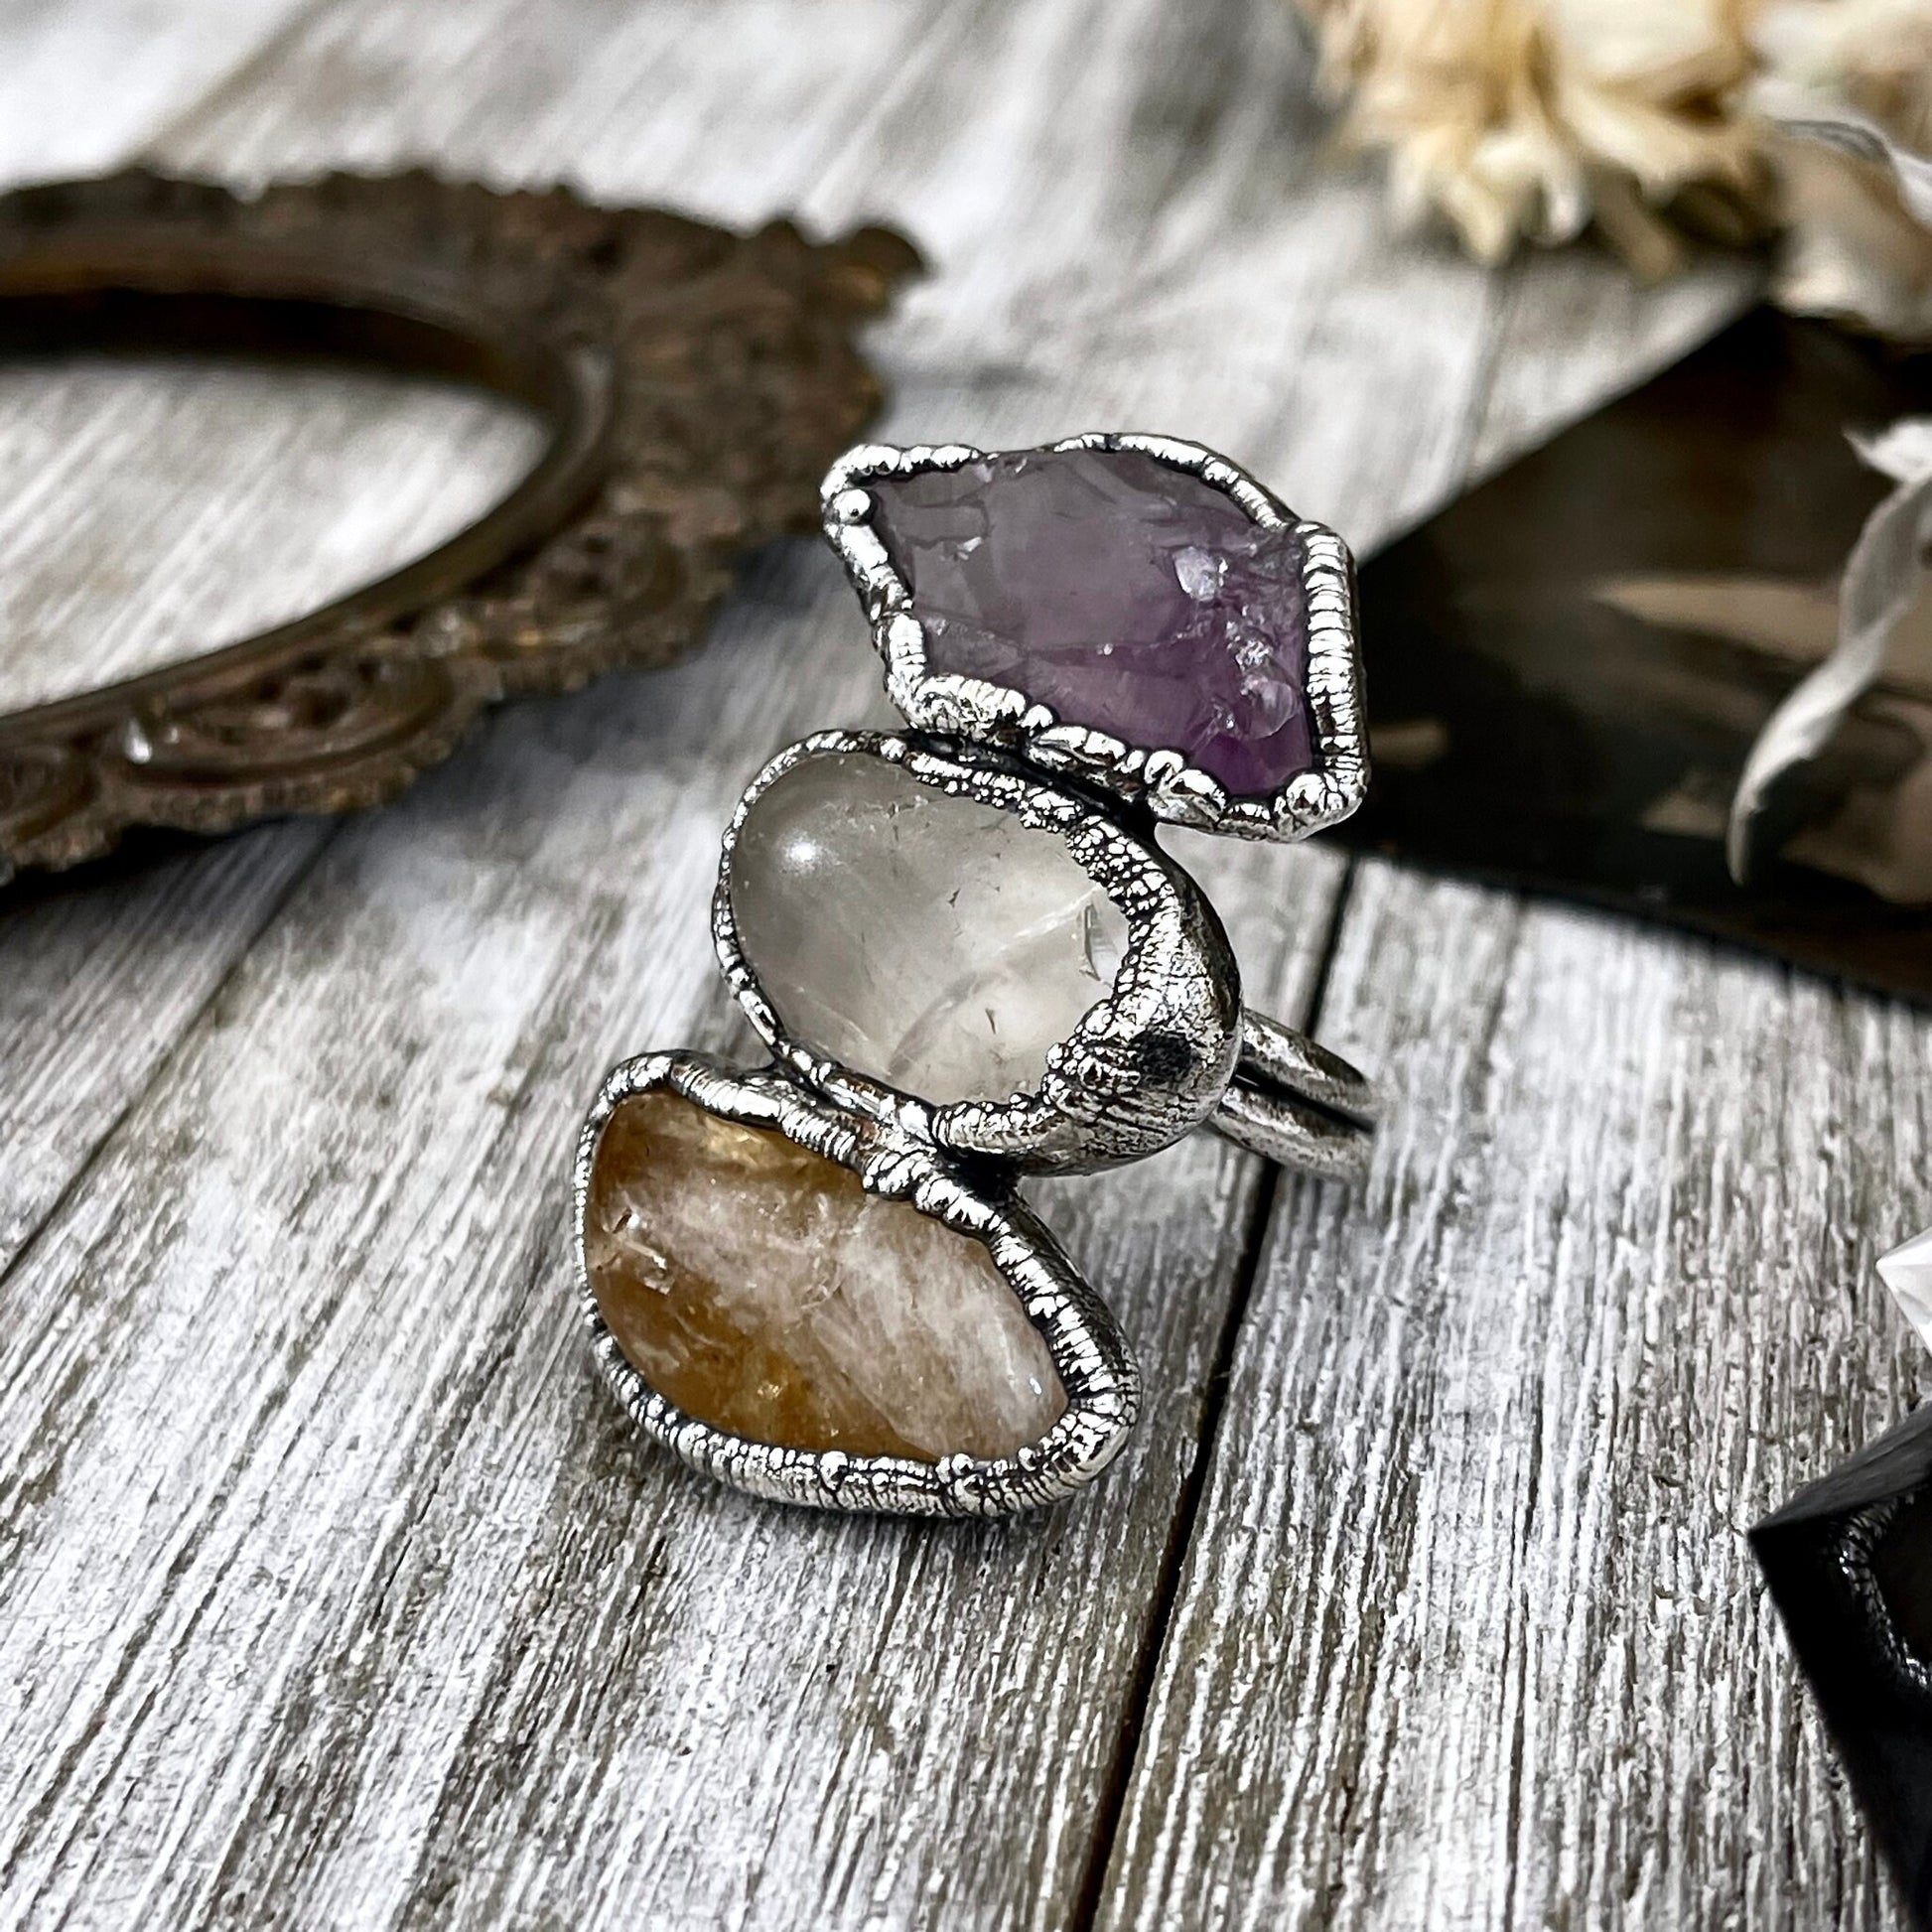 Size 6 Crystal Ring - Three Stone Ring Citrine Clear Quartz Raw Amethyst Ring Silver/ Foxlark Collection - One of a Kind / Crystal Jewelry